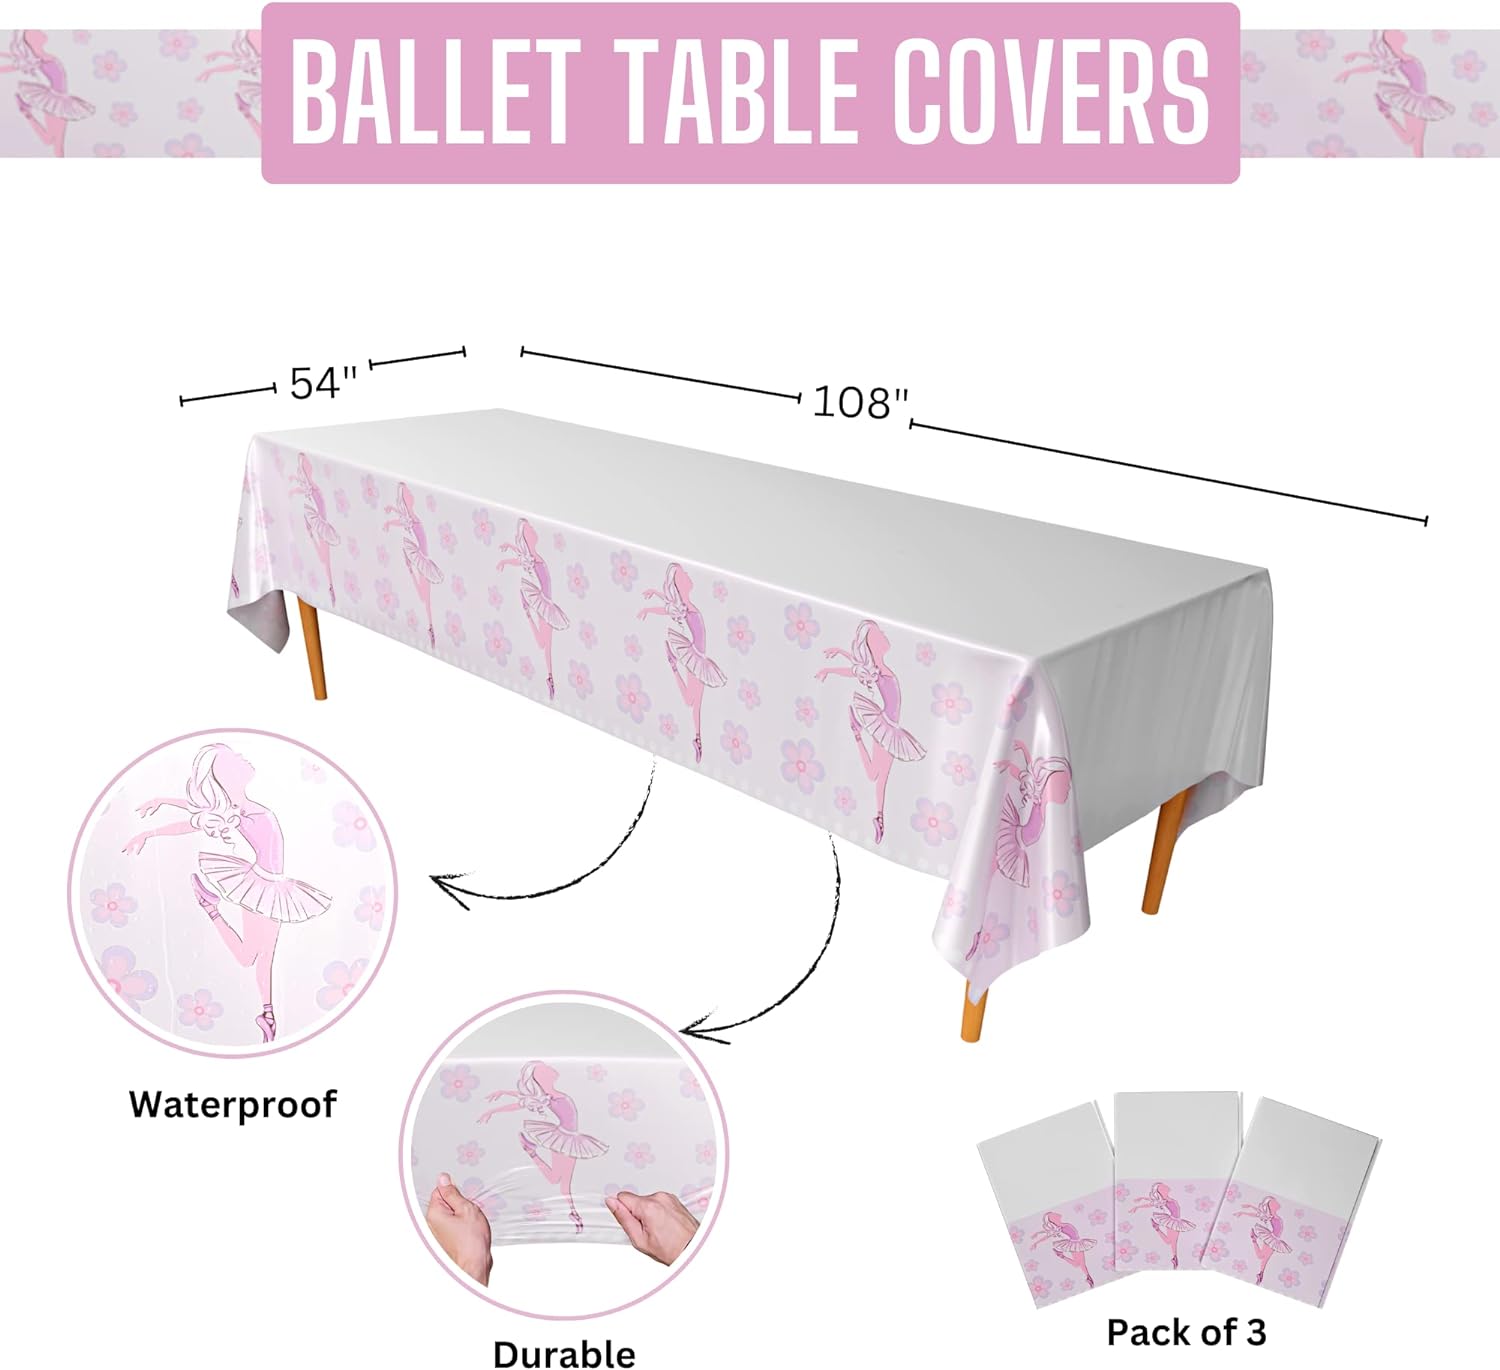 Ballet Plastic Table Covers (Pack of 3) - 54in x 108in XL